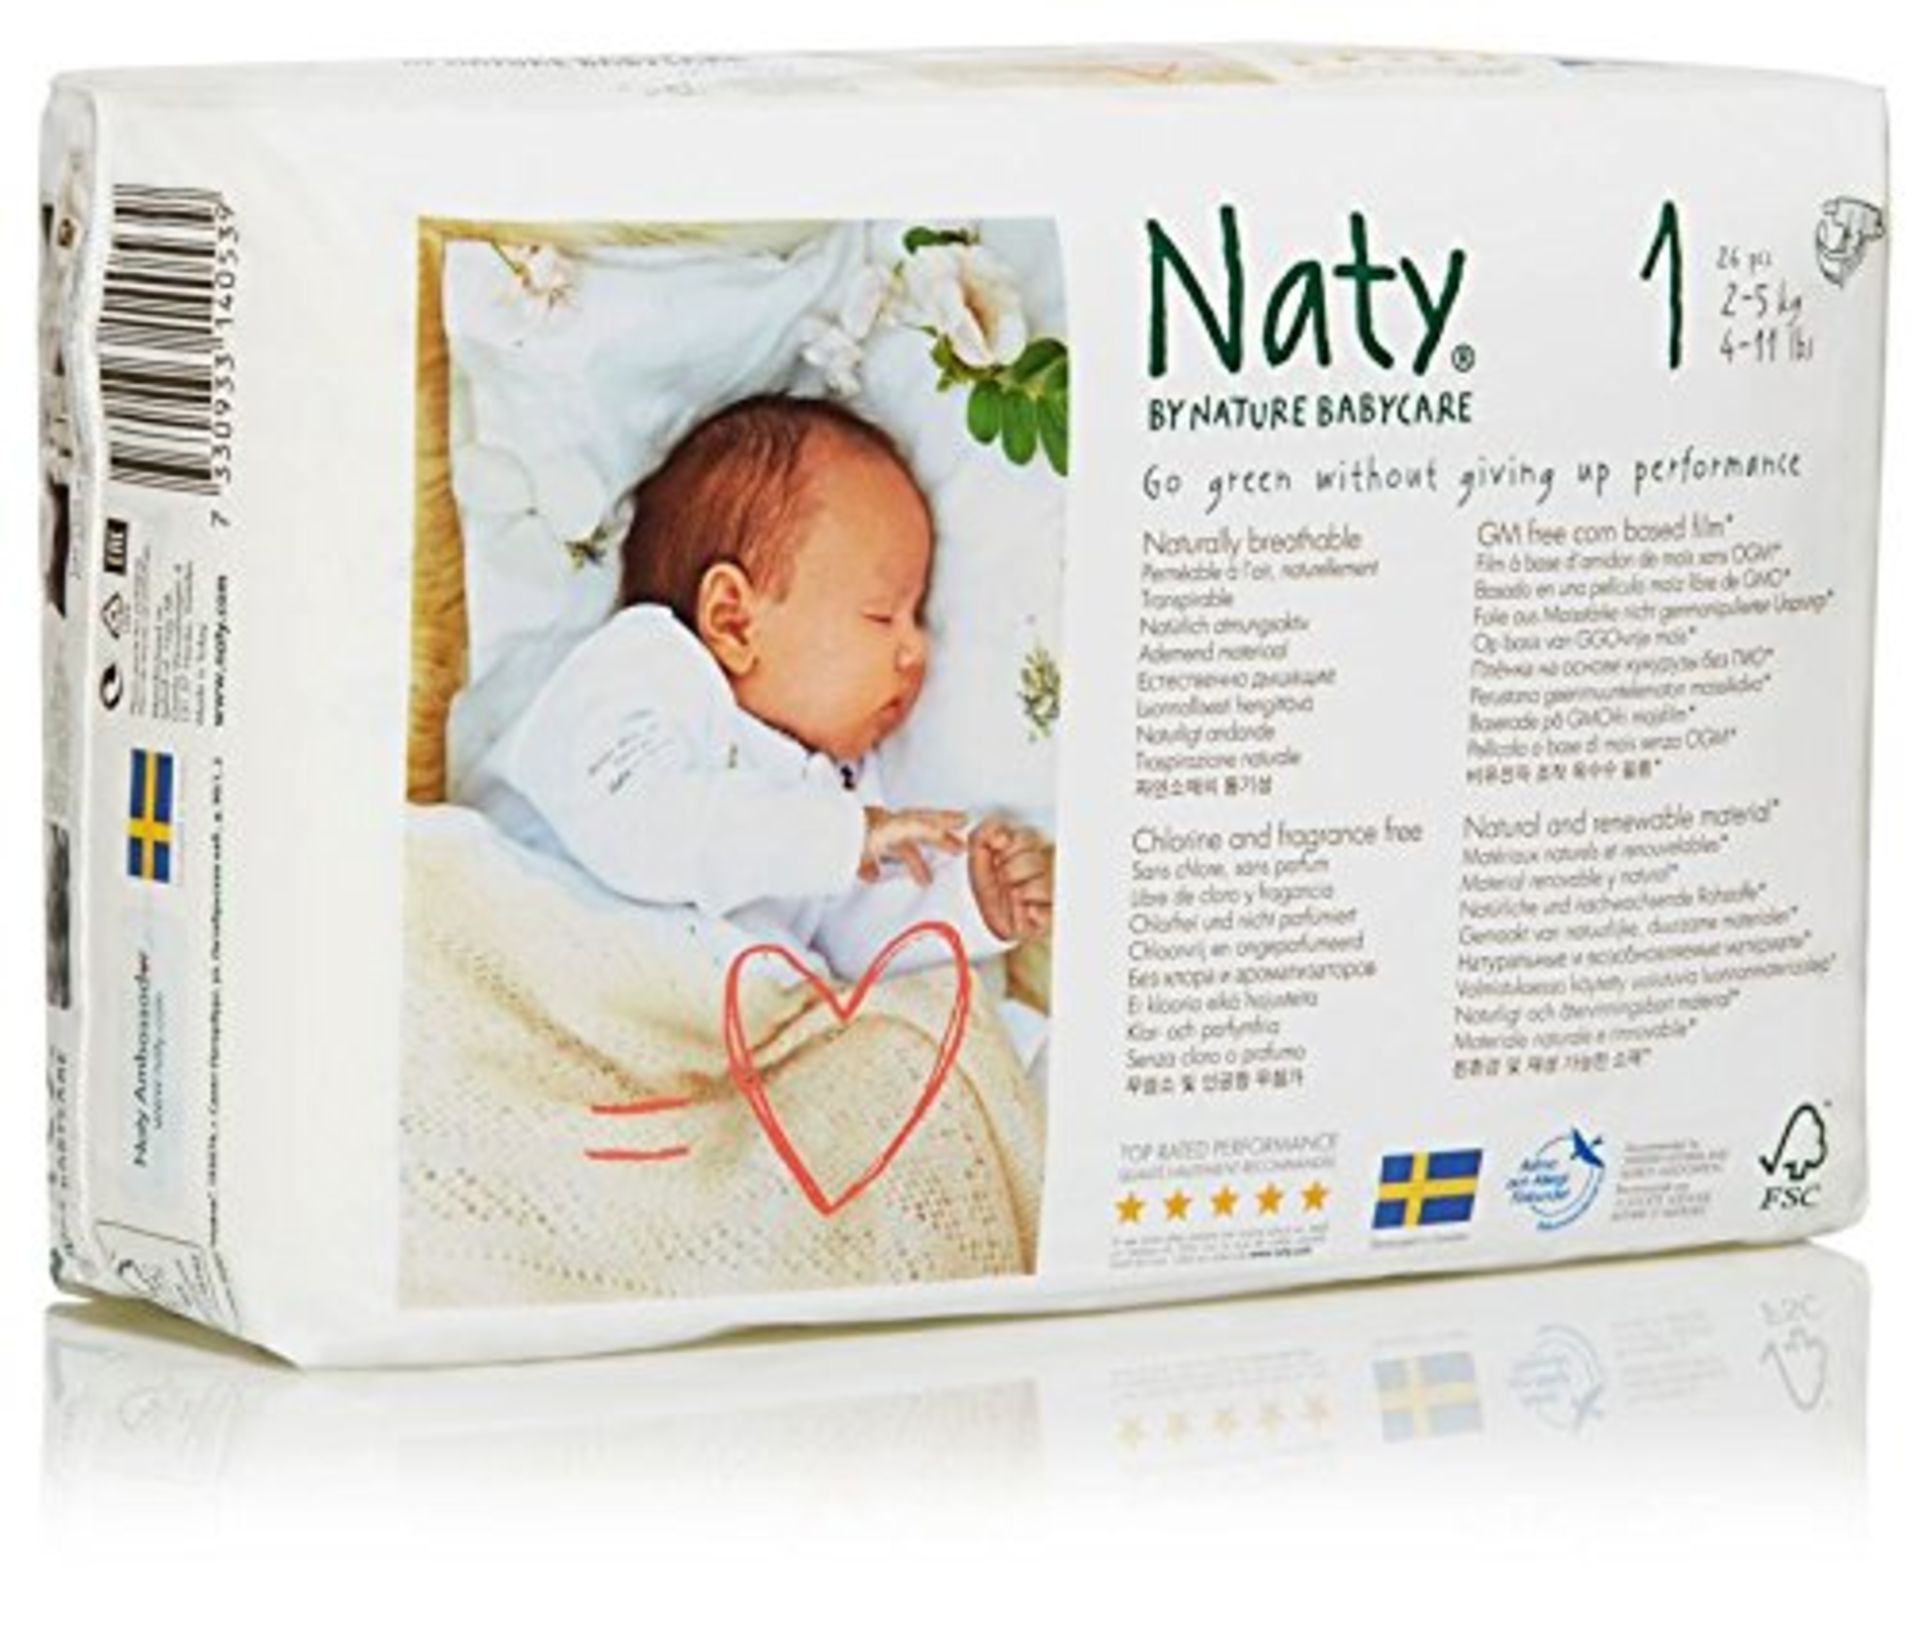 1 Box of 5 units , Containing Baby Products - Box Number 'BABY 240' - Latest AMZ price £77.3 - - Image 4 of 4